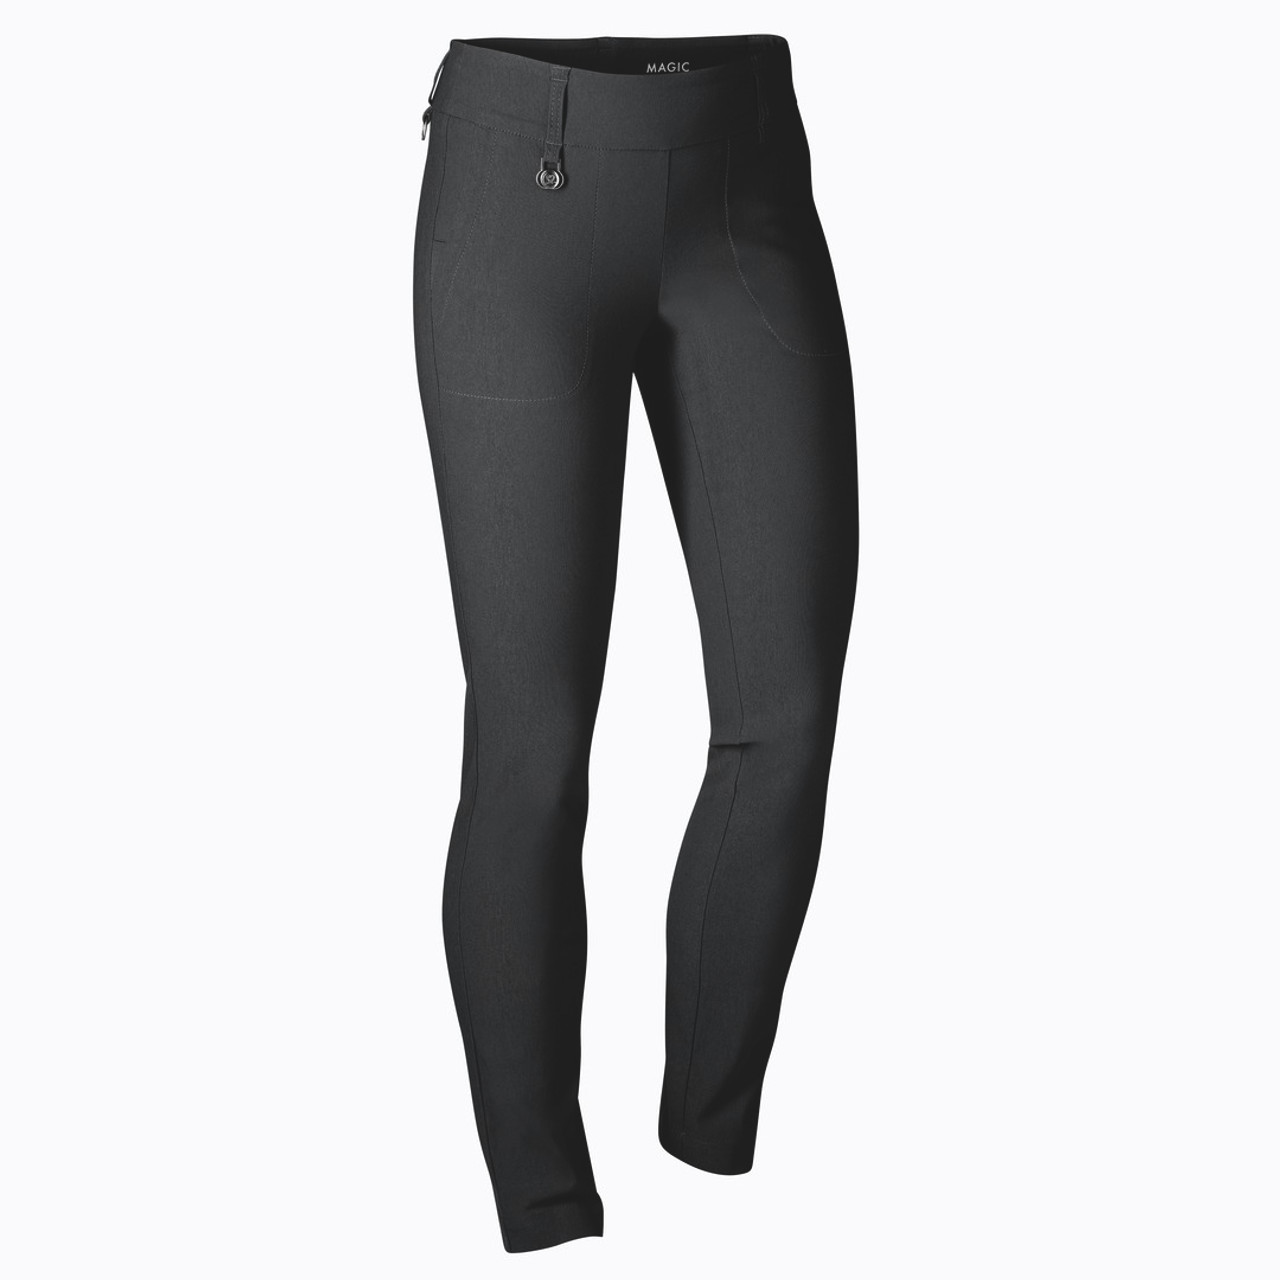 DS Thermo Pro Stretch Black Pants 29